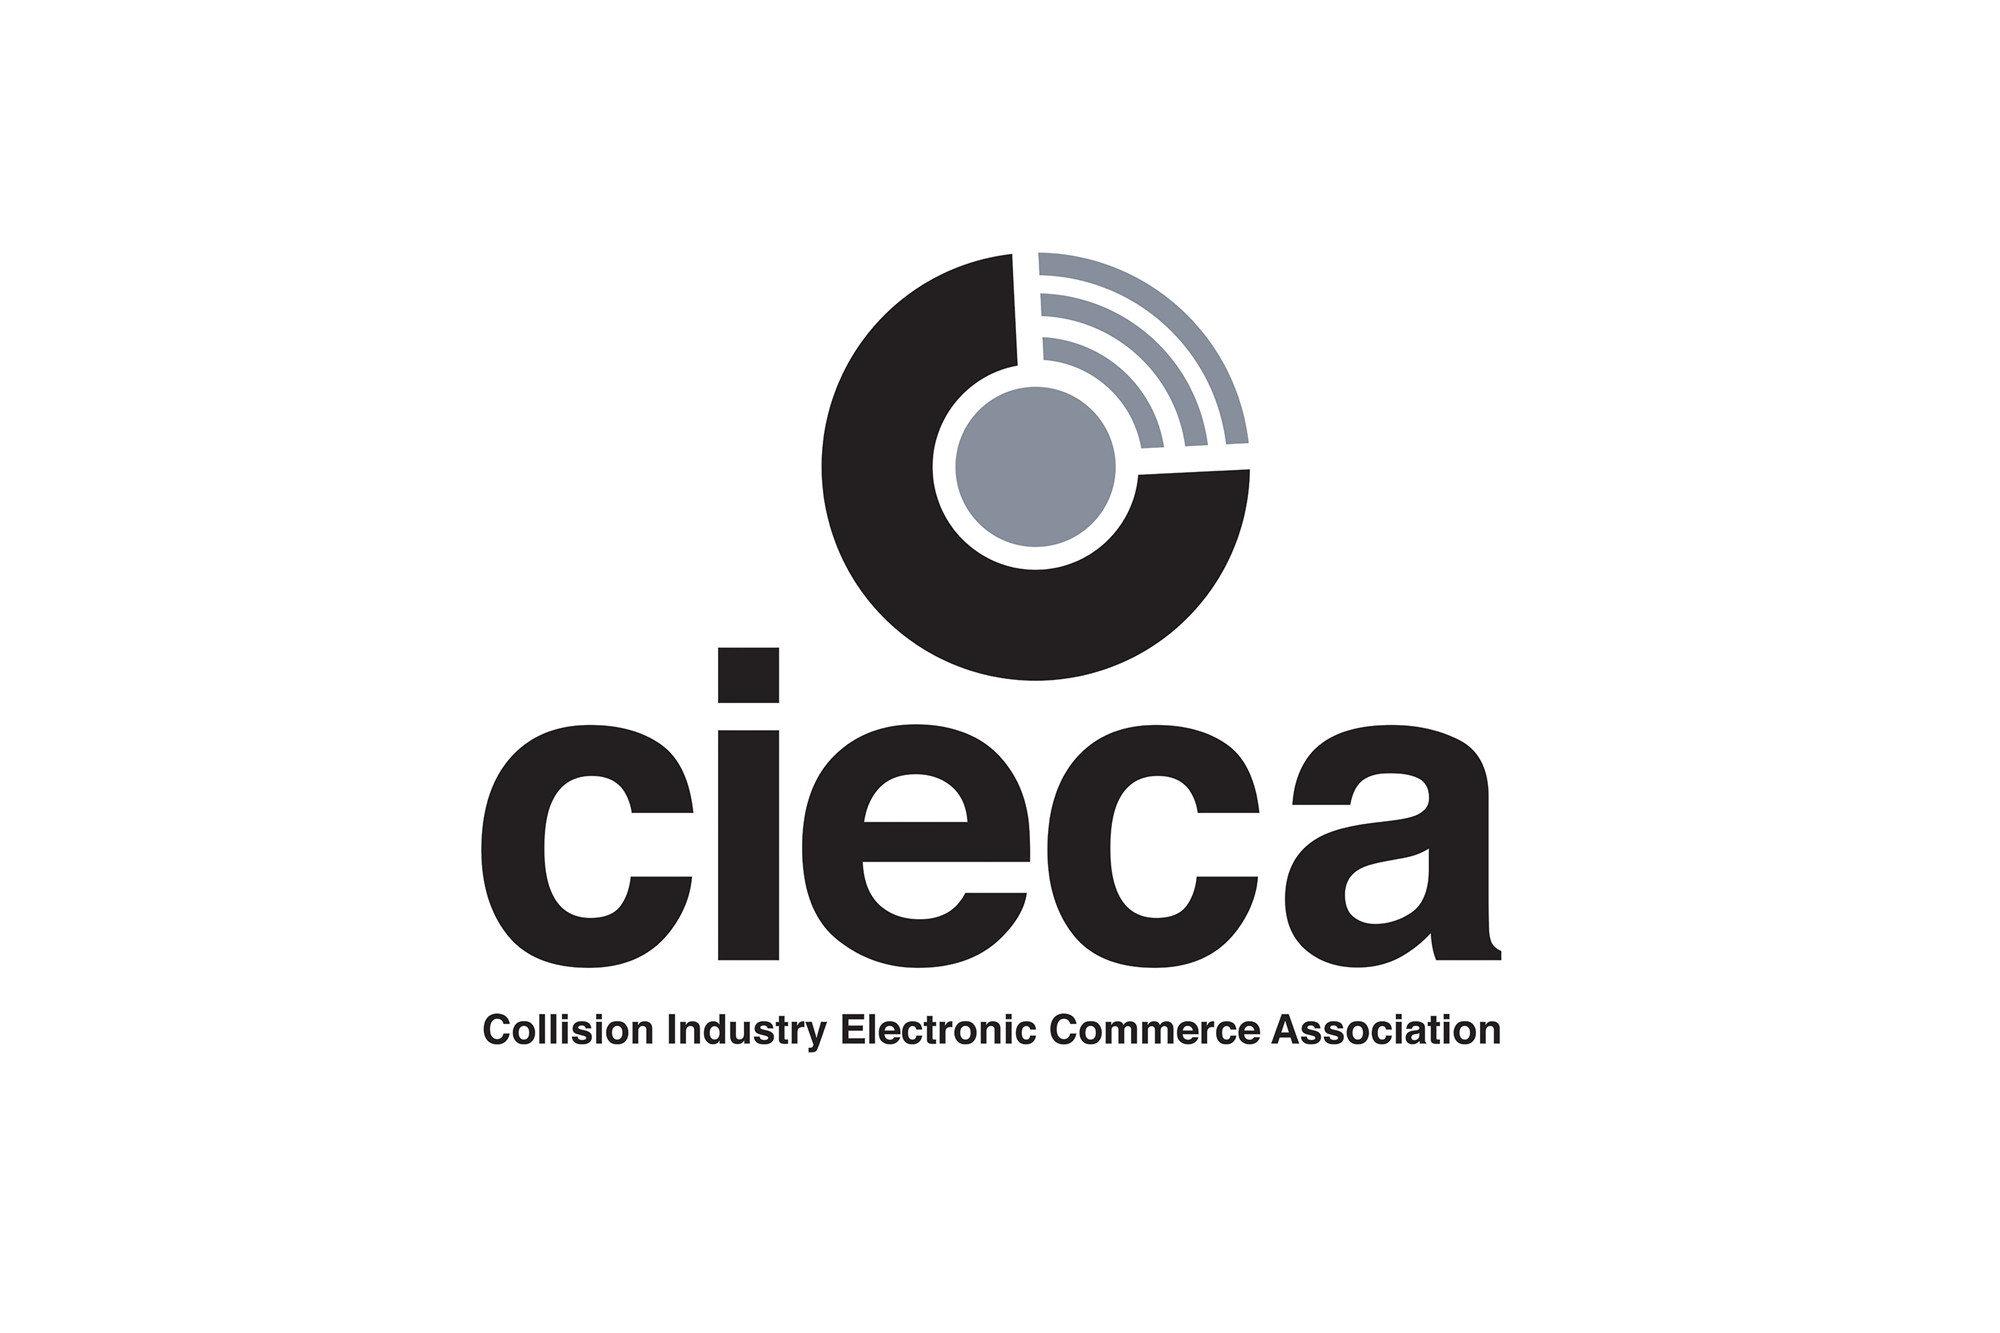 March 2021 CIECAST Webinar Is On Claims Automation